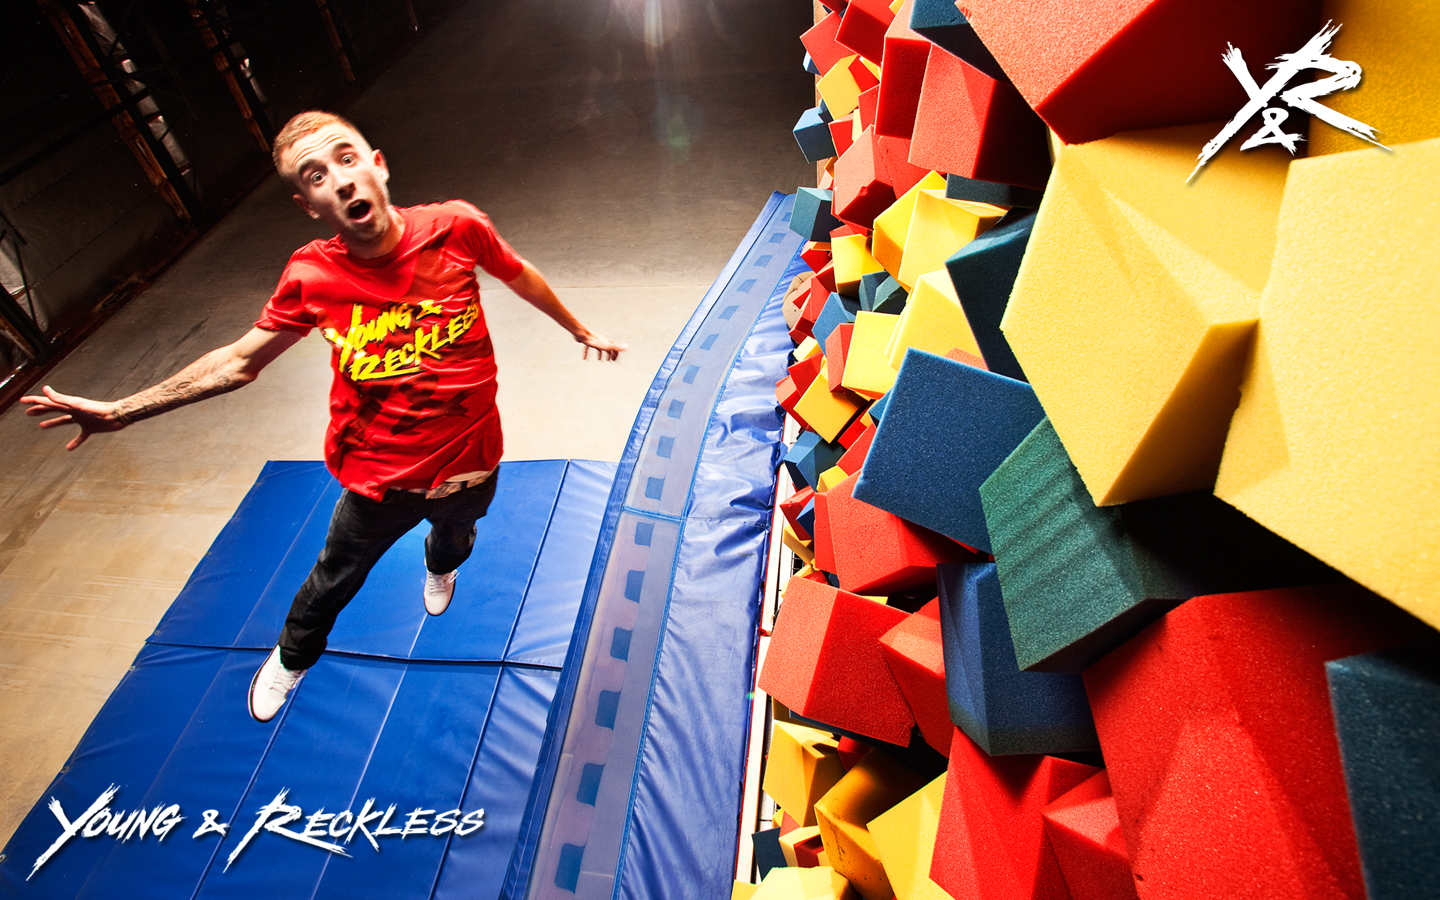 drama young and reckless foam pit (FullScreen)